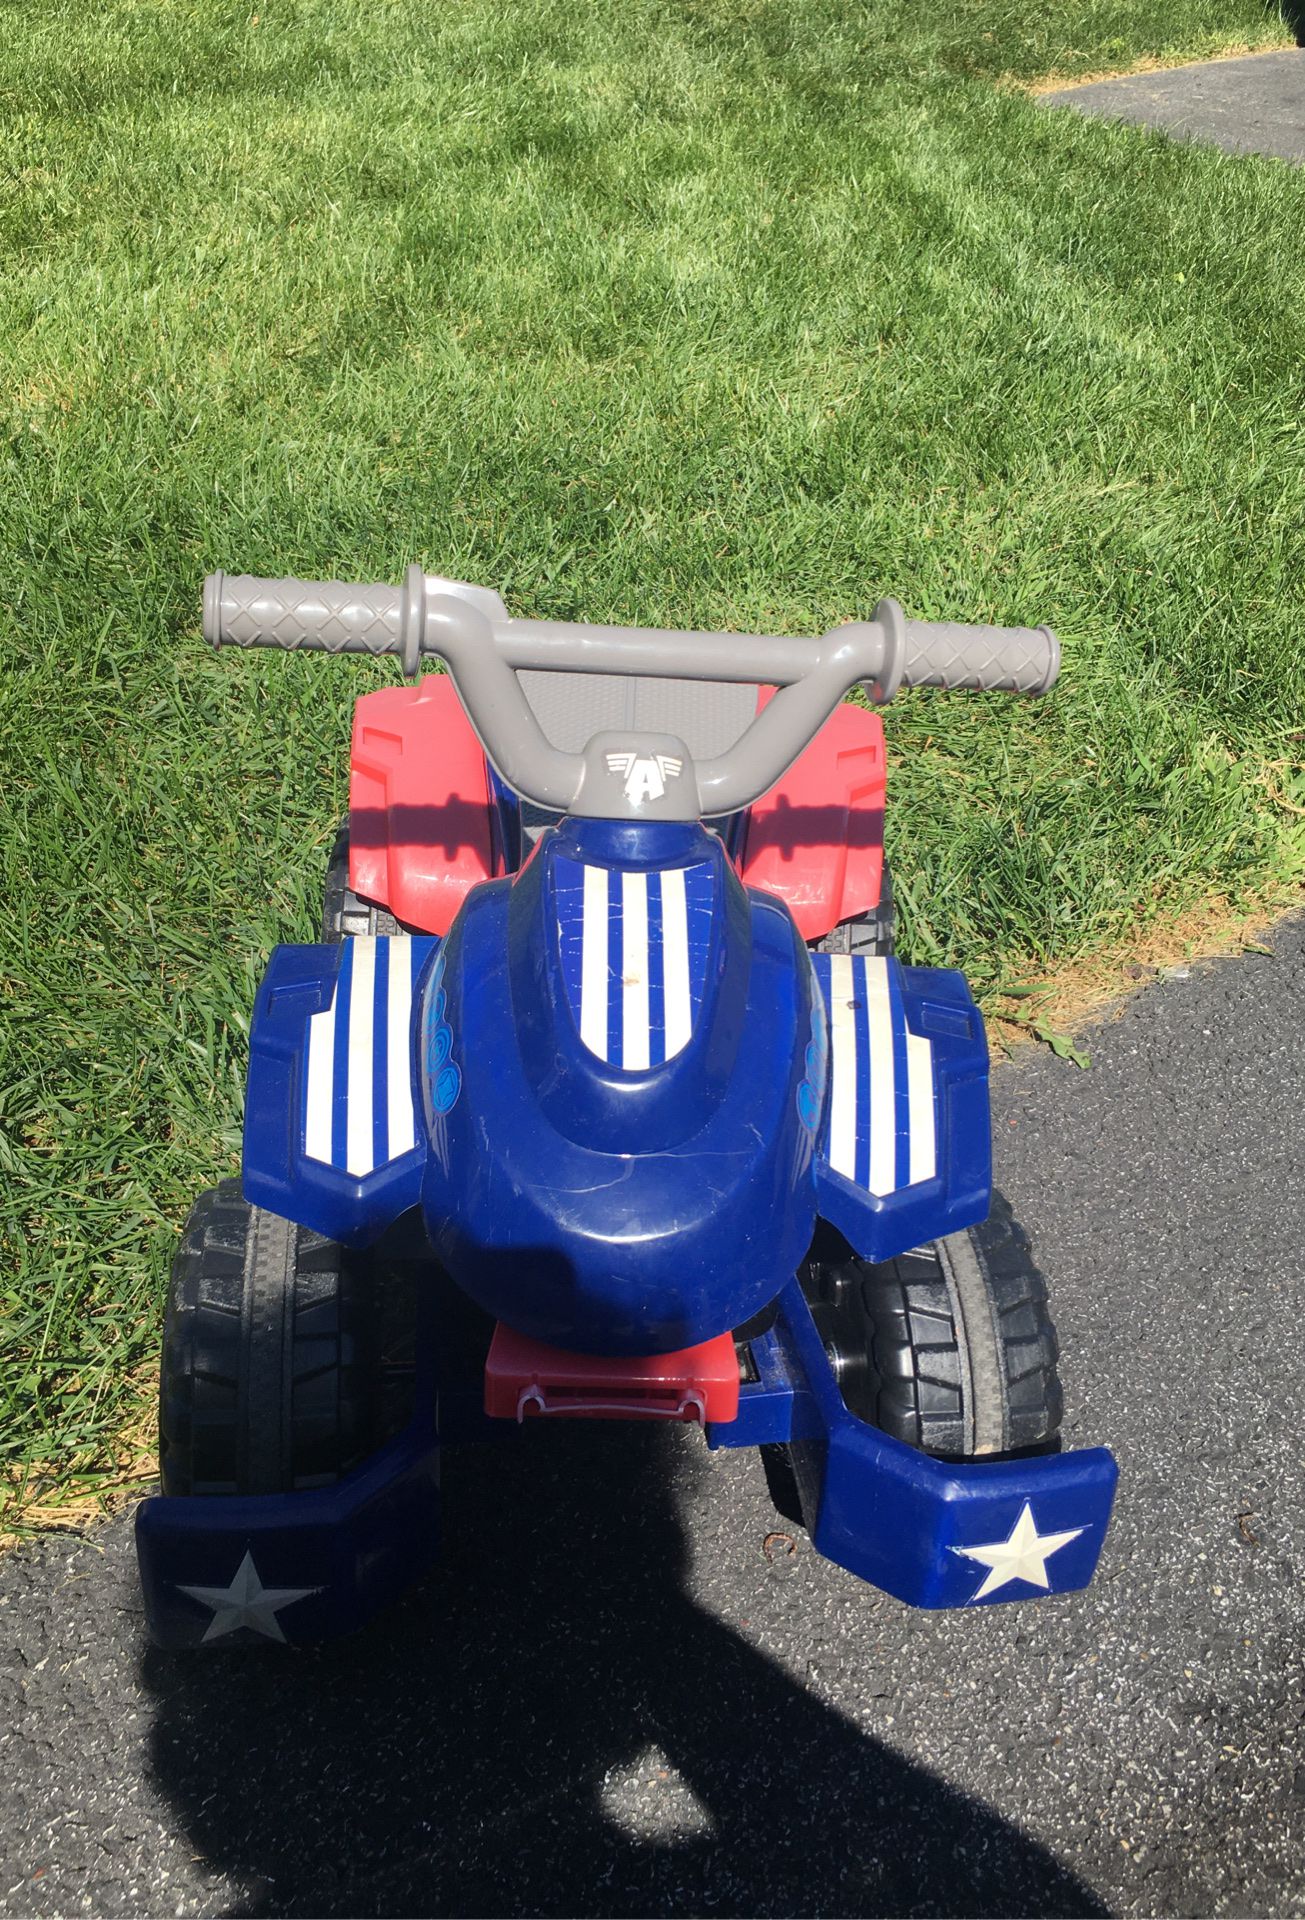 Captain America electric children car for ages 2-3